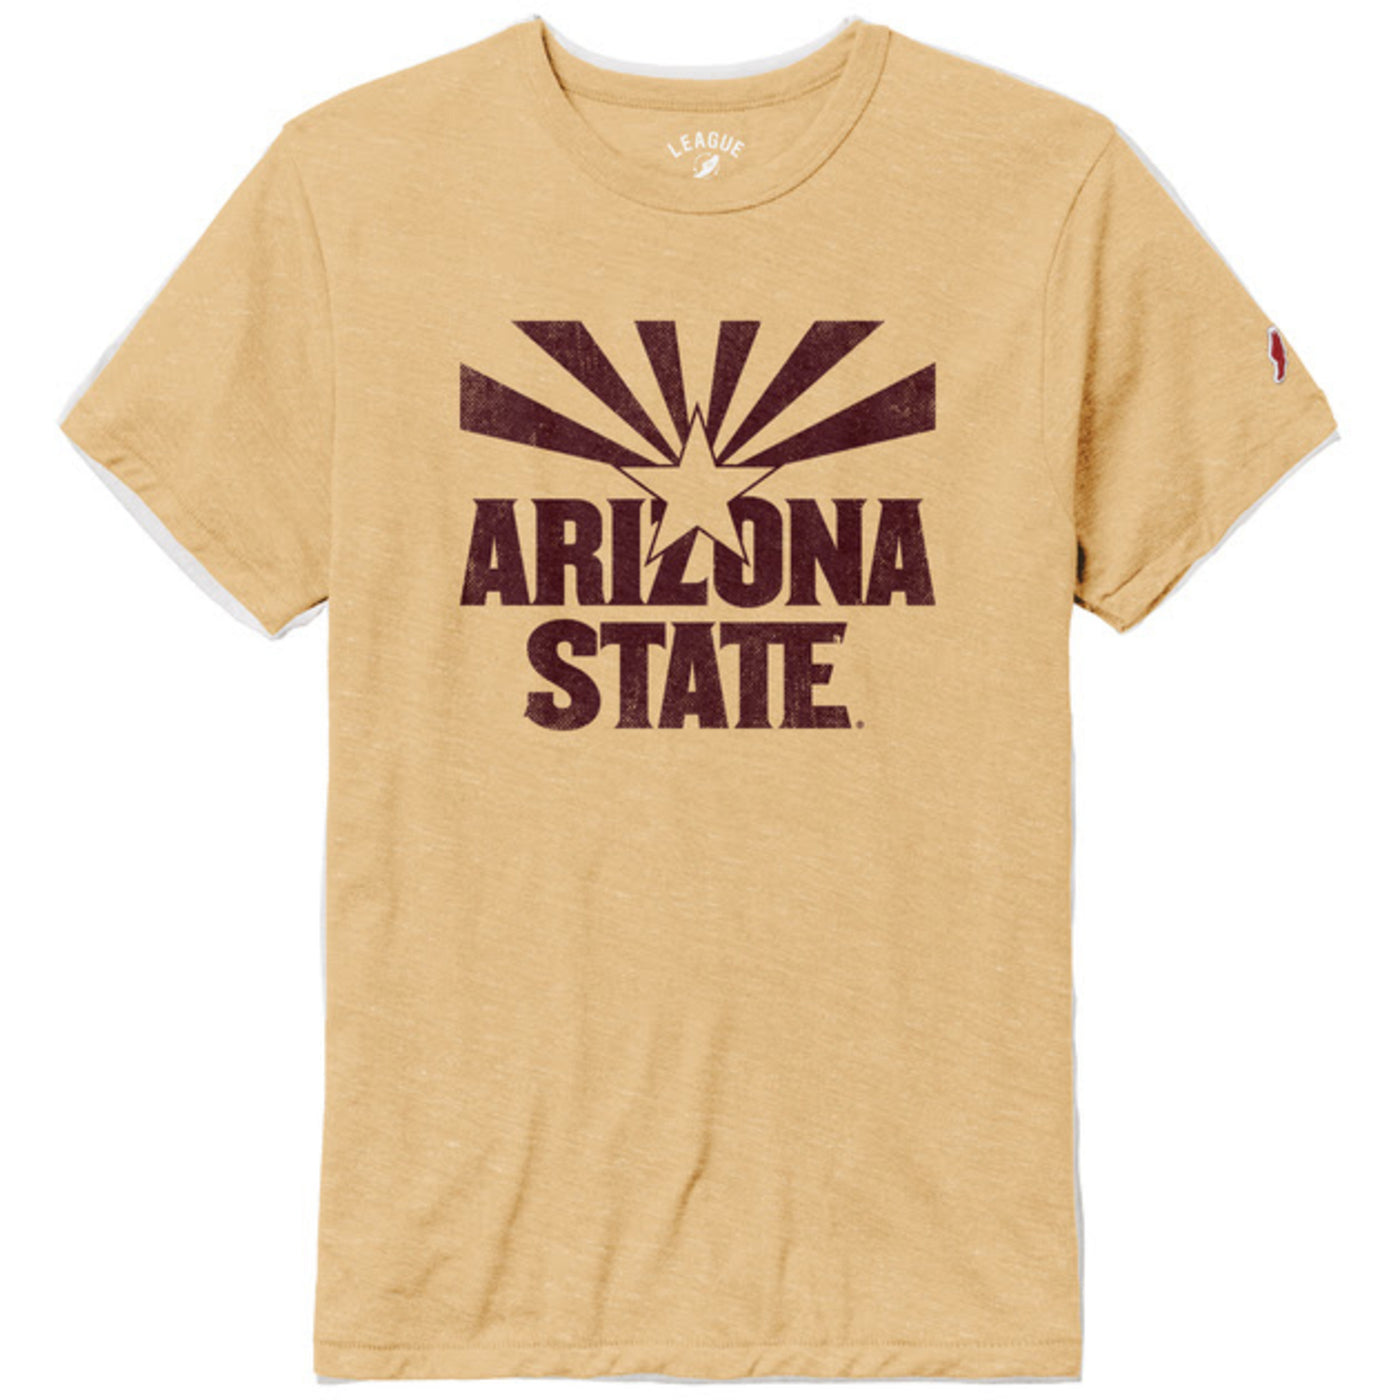 ASU gold shirt with maroon Arizona state flag outline above the text 